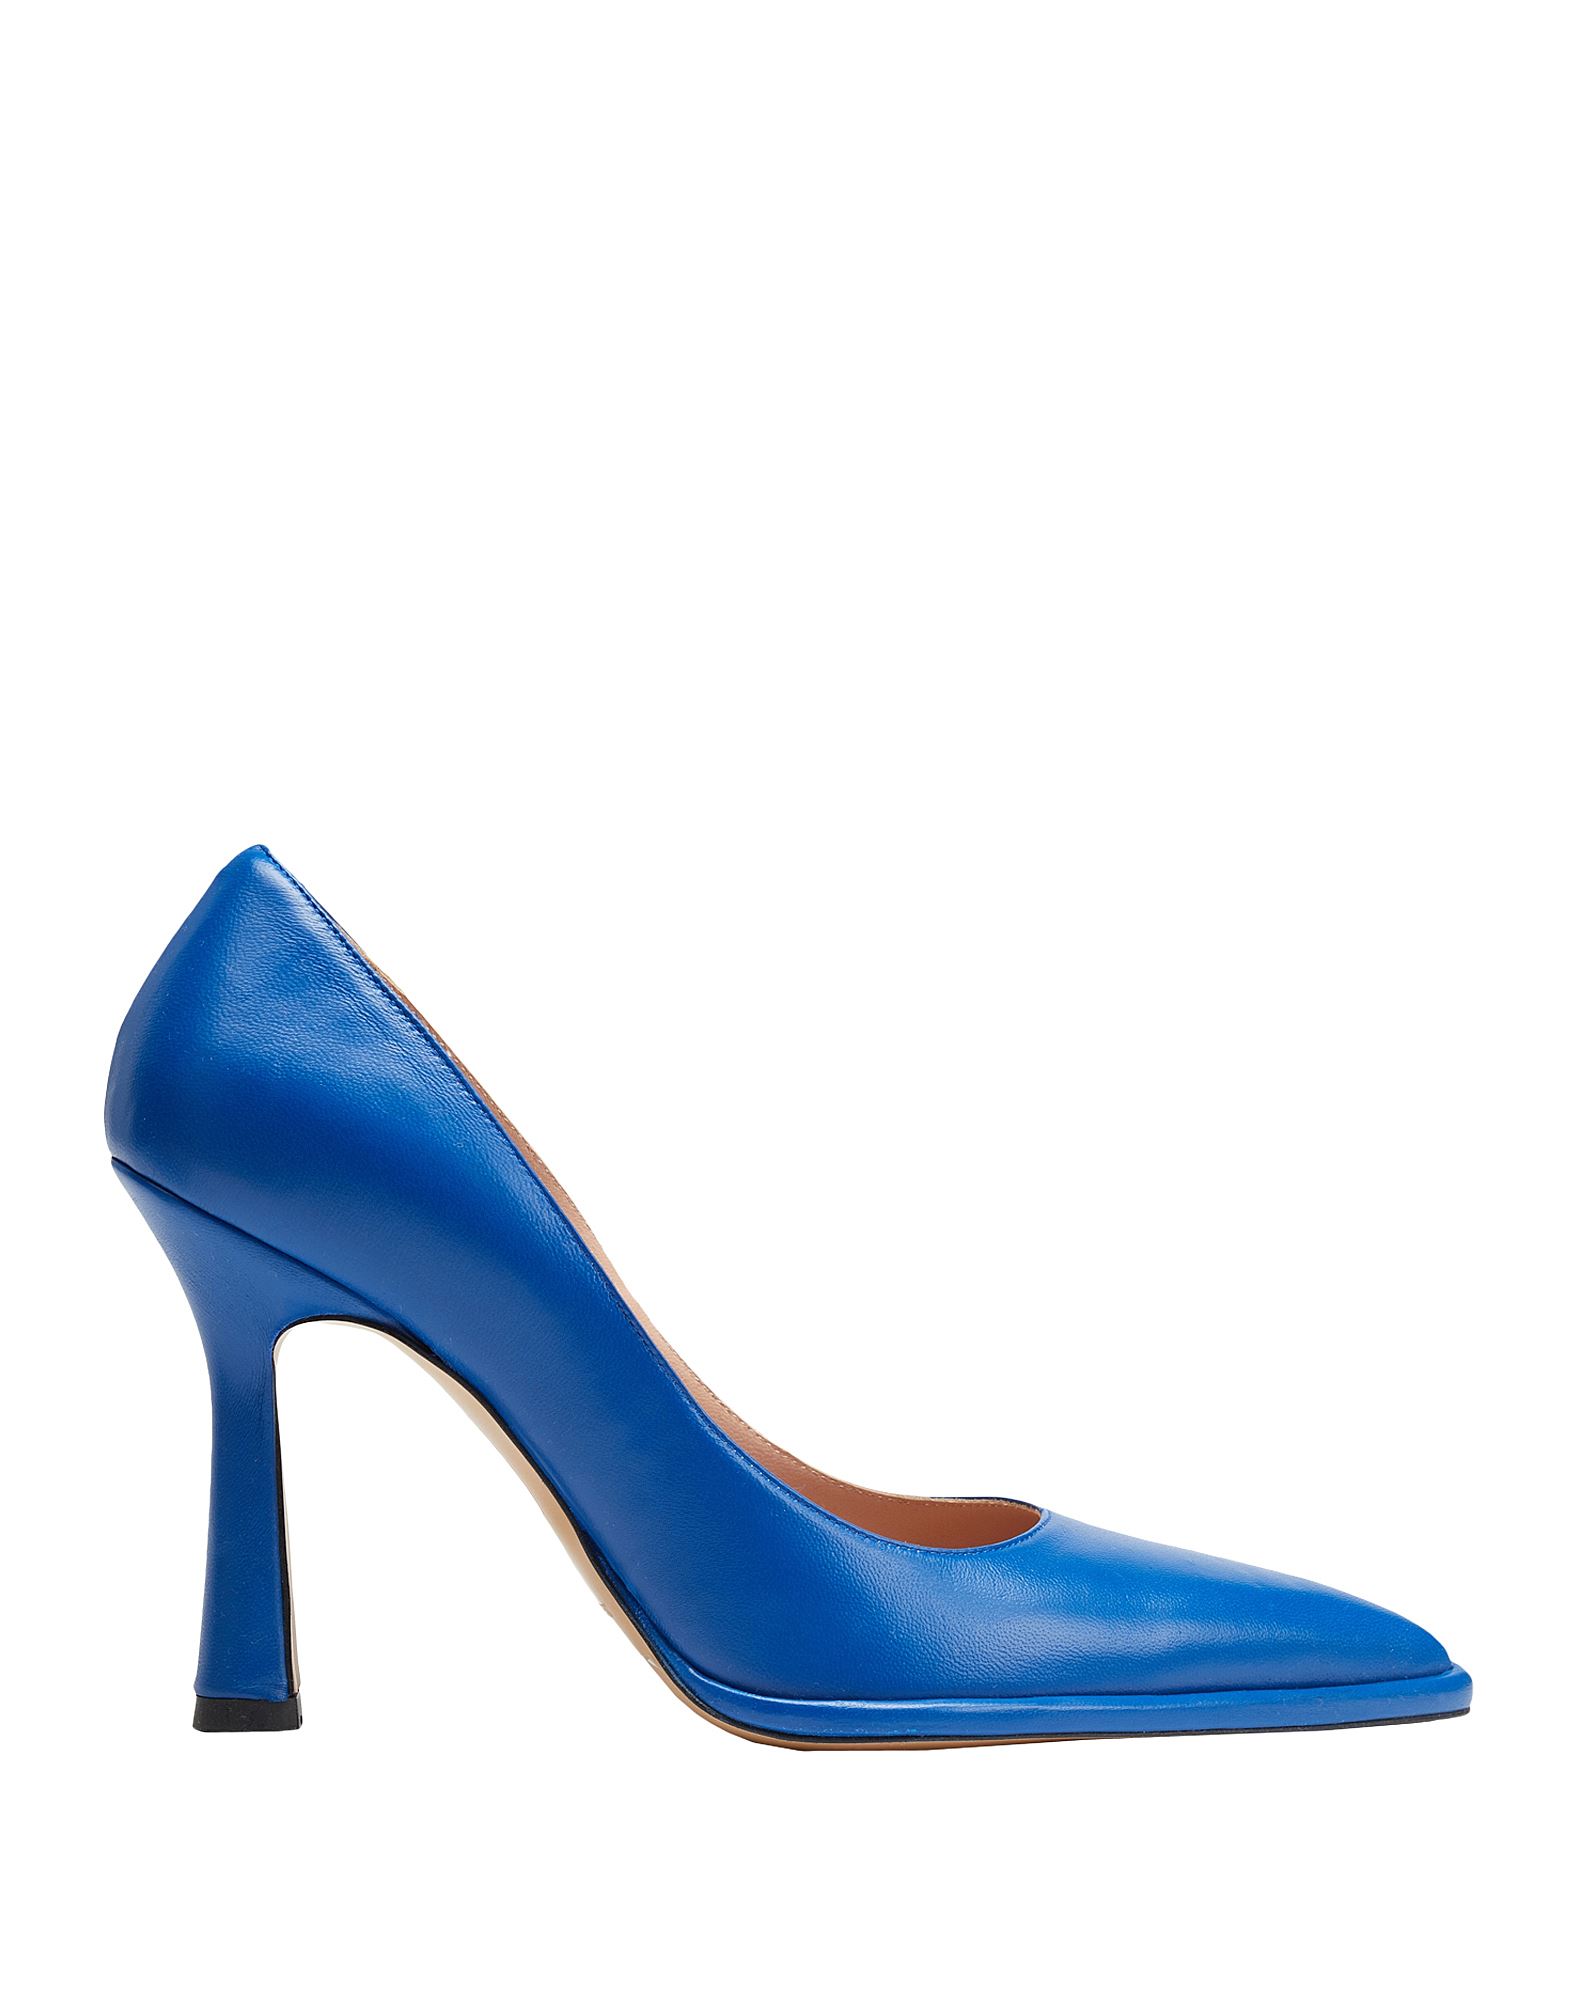 8 BY YOOX 8 BY YOOX LEATHER POINTED-TOE PUMPS WOMAN PUMPS BRIGHT BLUE SIZE 11 OVINE LEATHER